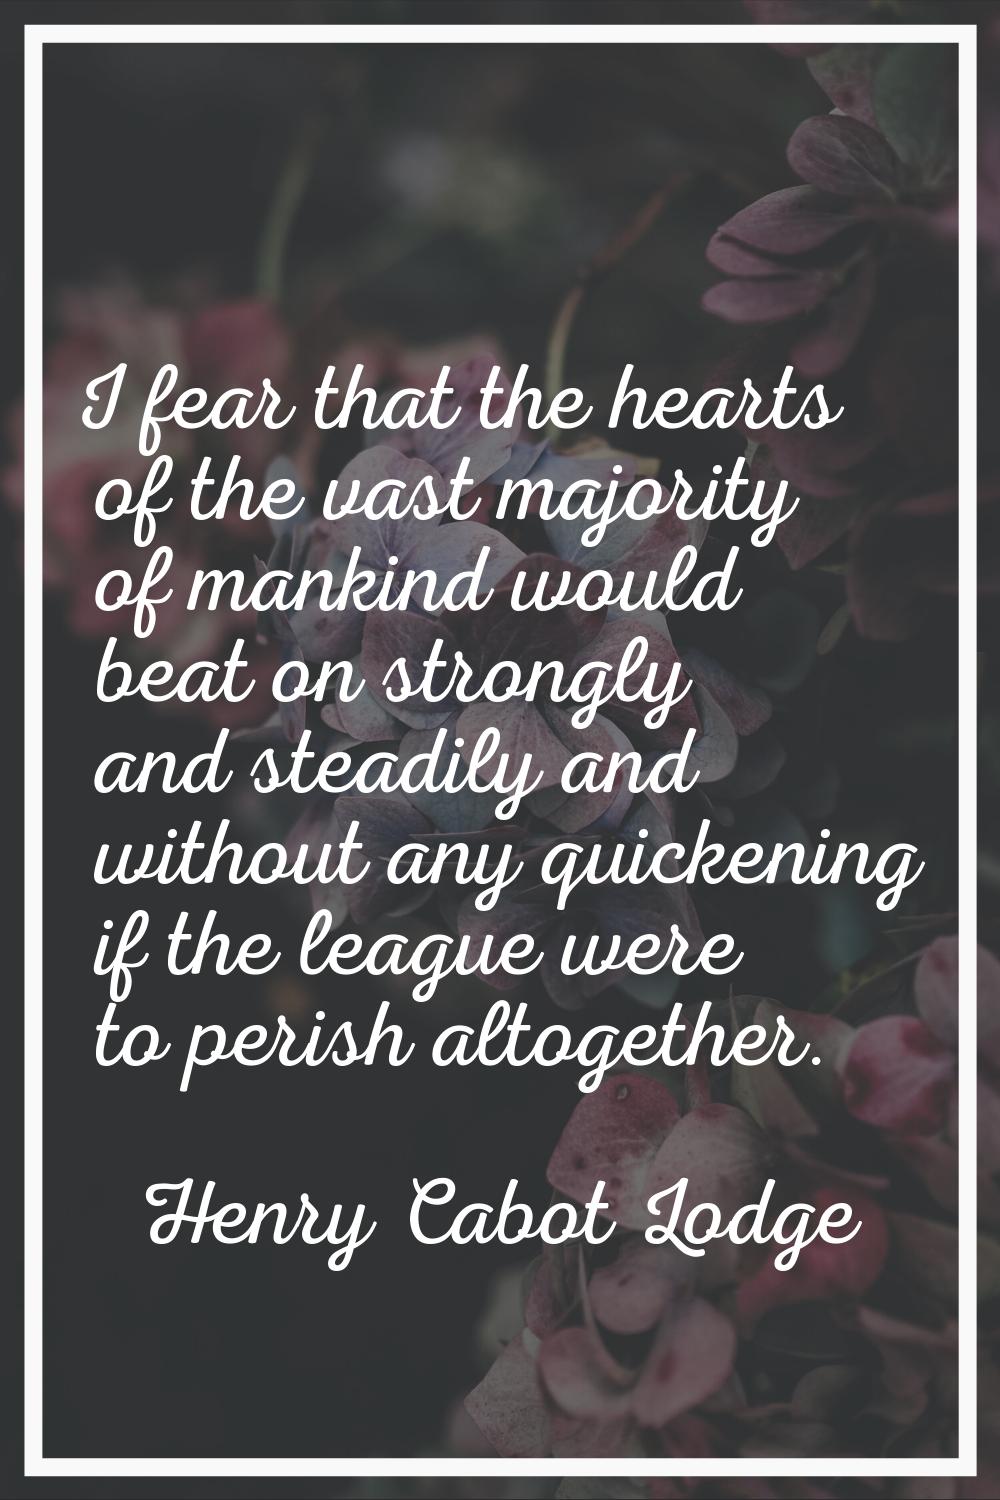 I fear that the hearts of the vast majority of mankind would beat on strongly and steadily and with